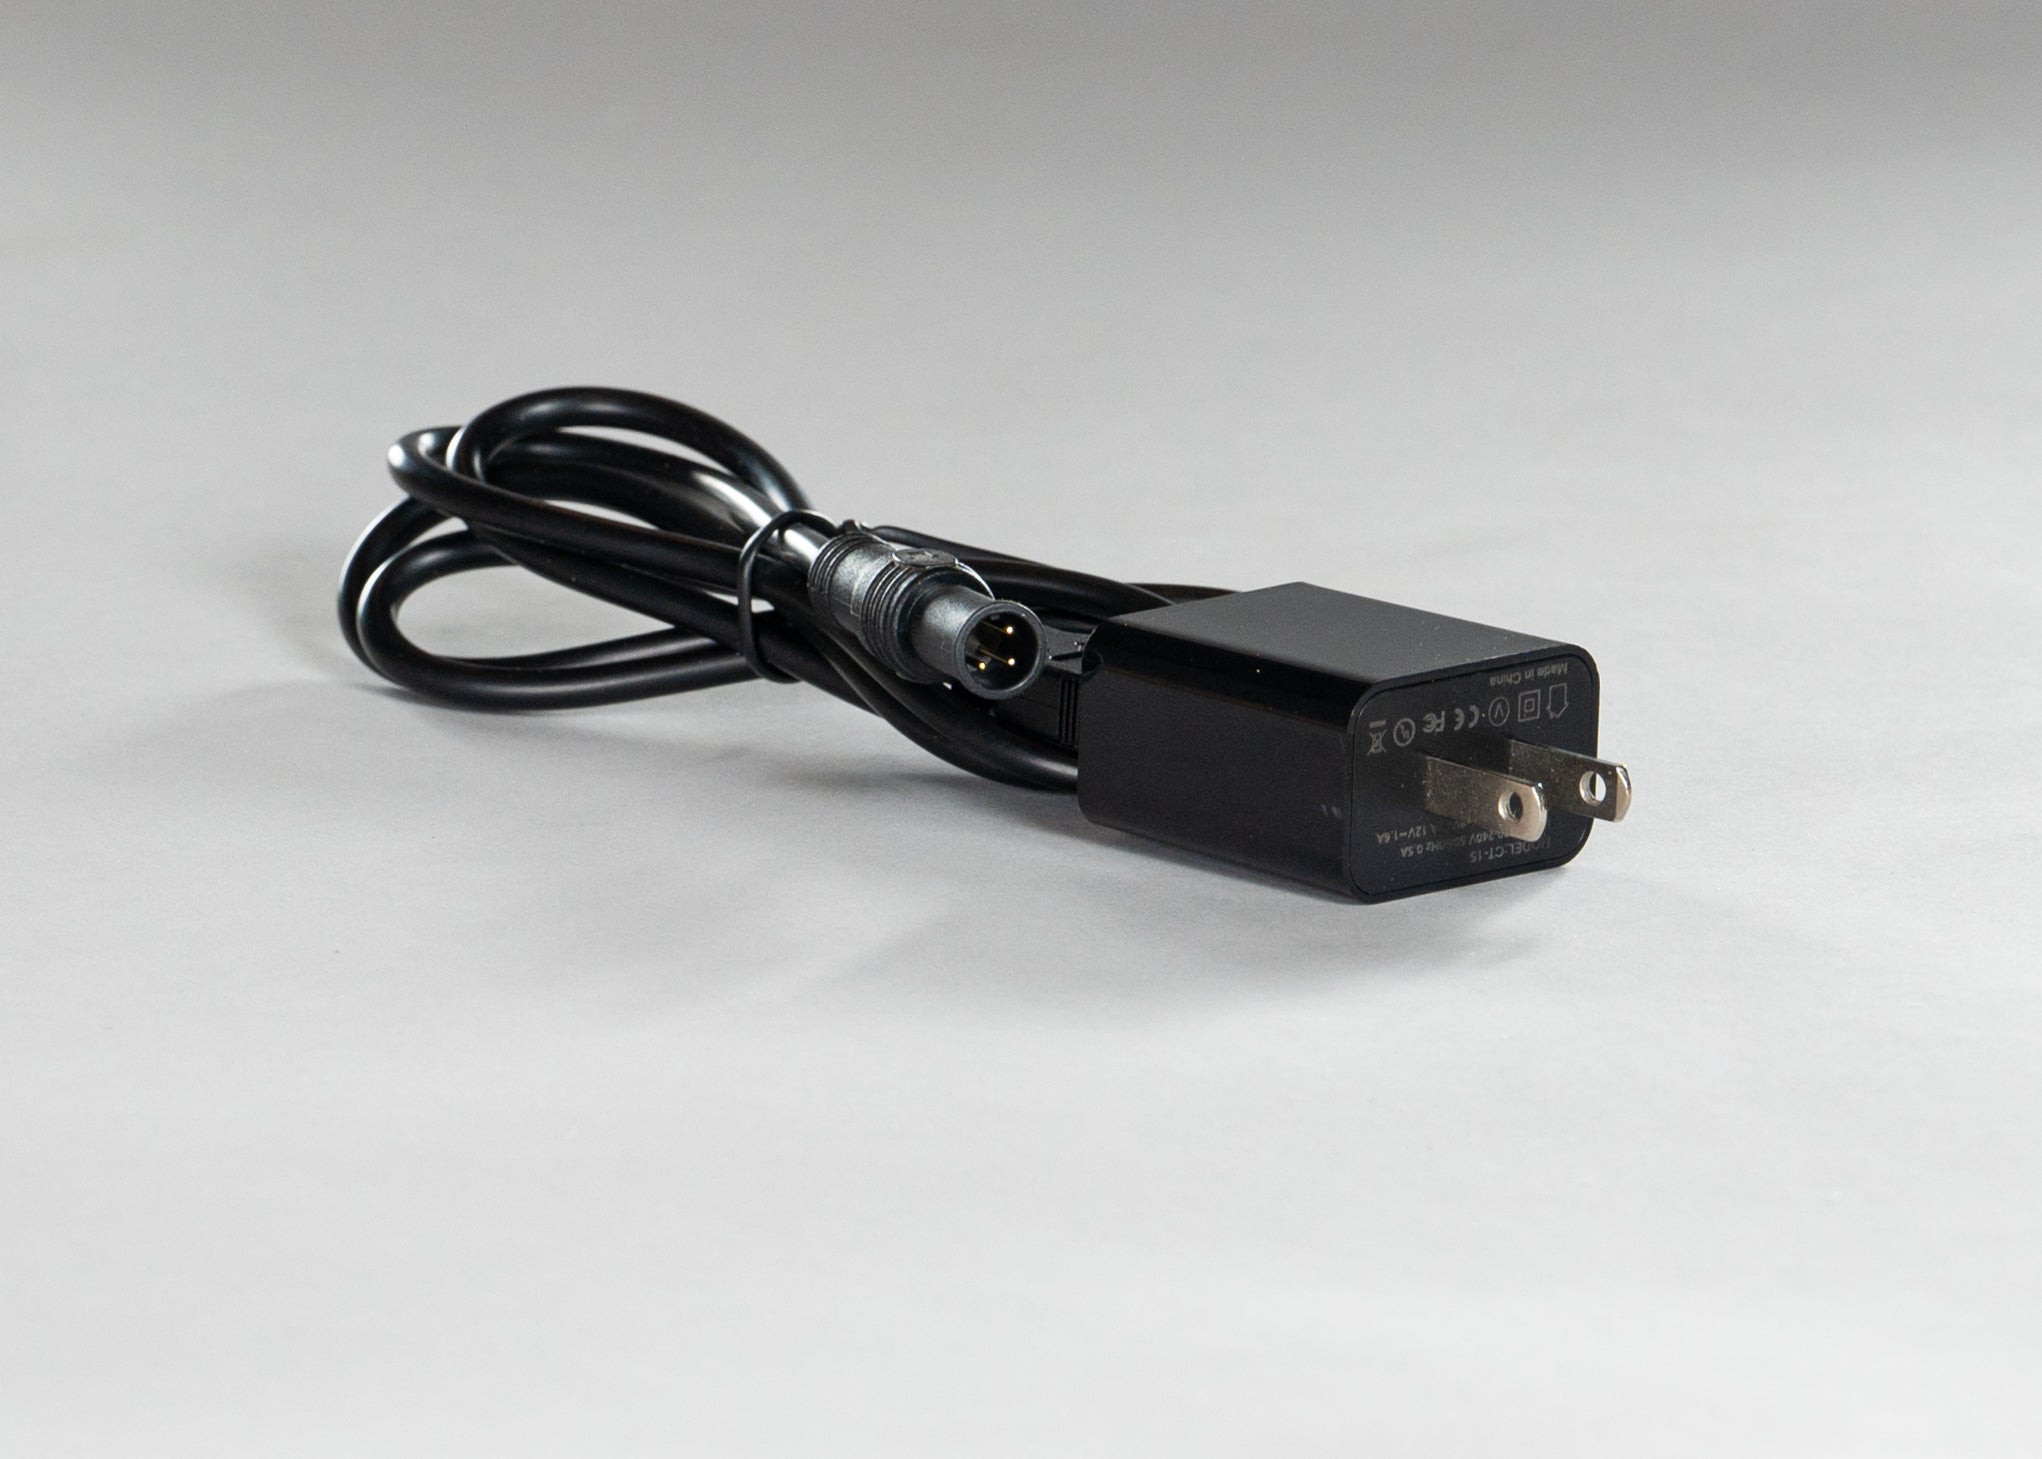 Black countCAM charging cable with outlet based tightly coiled and fastened with twist tie